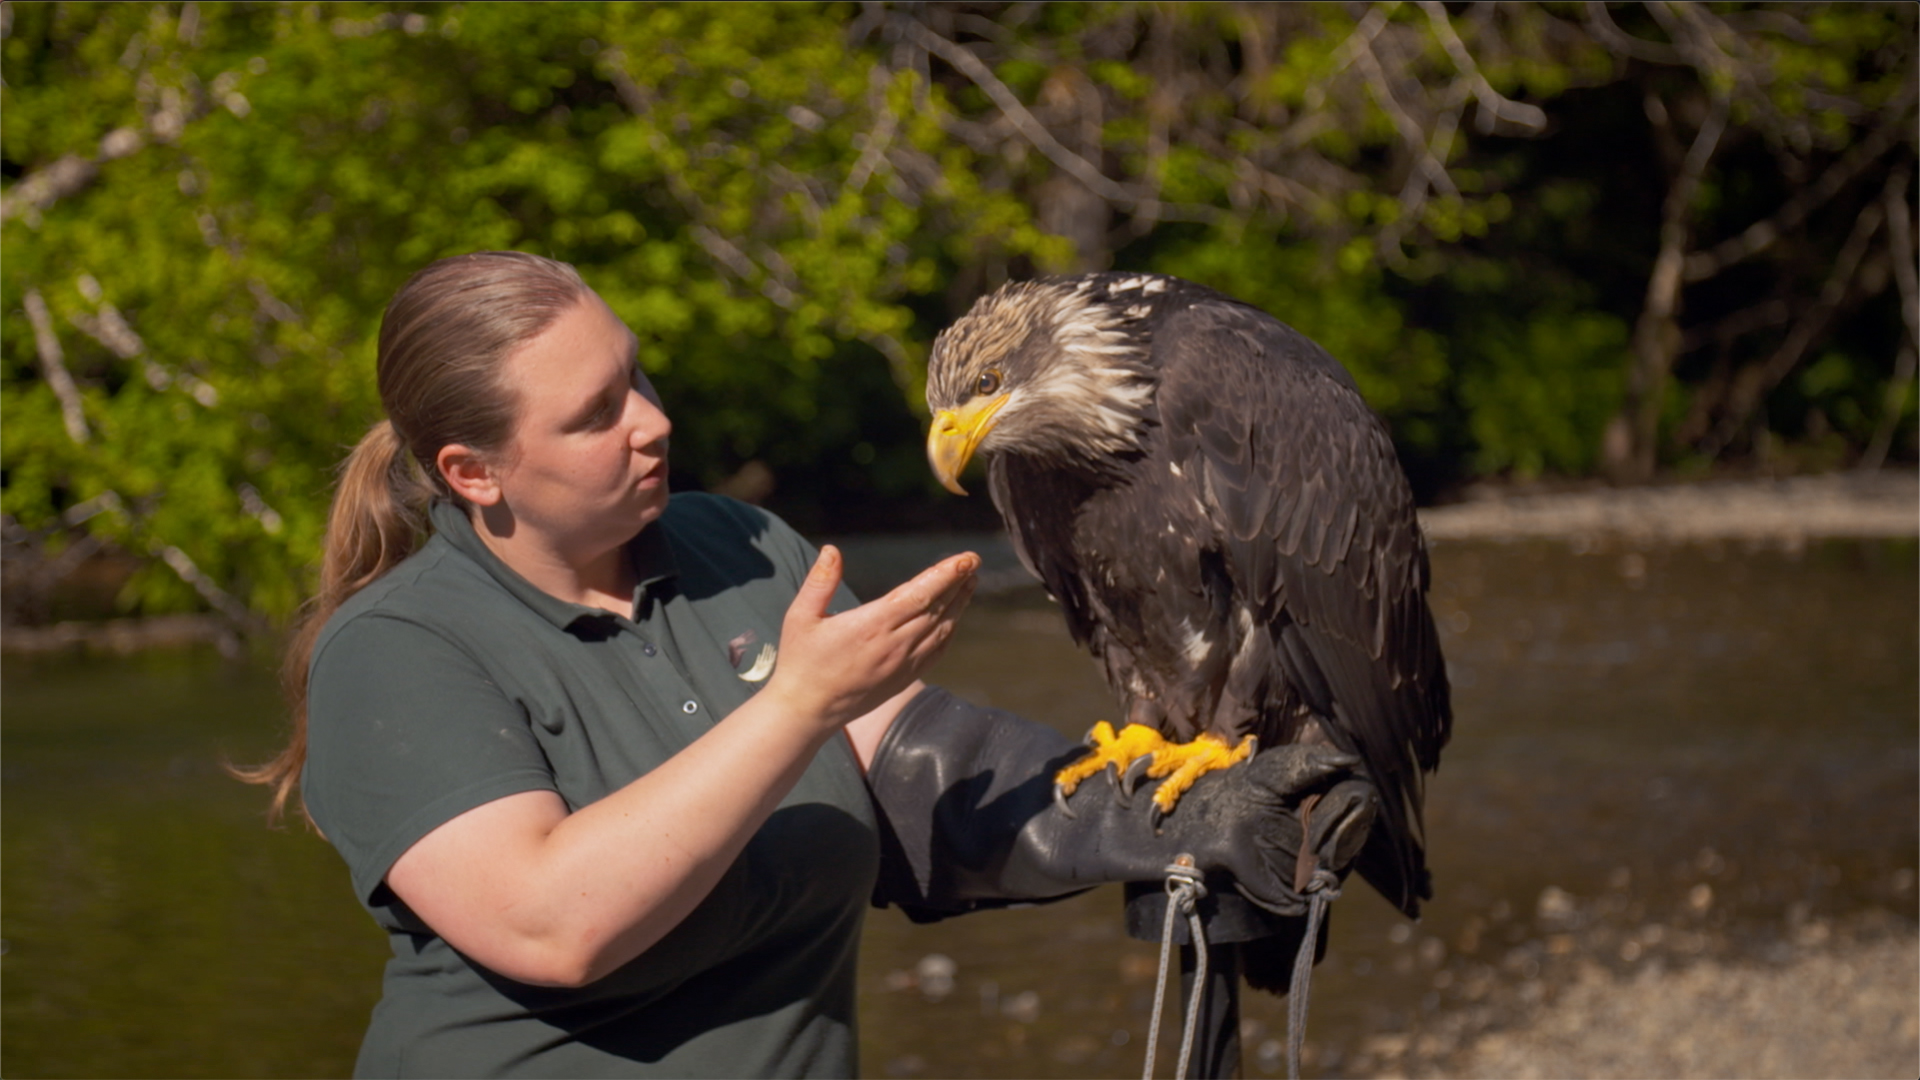 Sheila feeds a resident bald eagle near the Alaska Raptor Center. This is from Alaska: Animal Rescue [Photo of the day - June 2022]